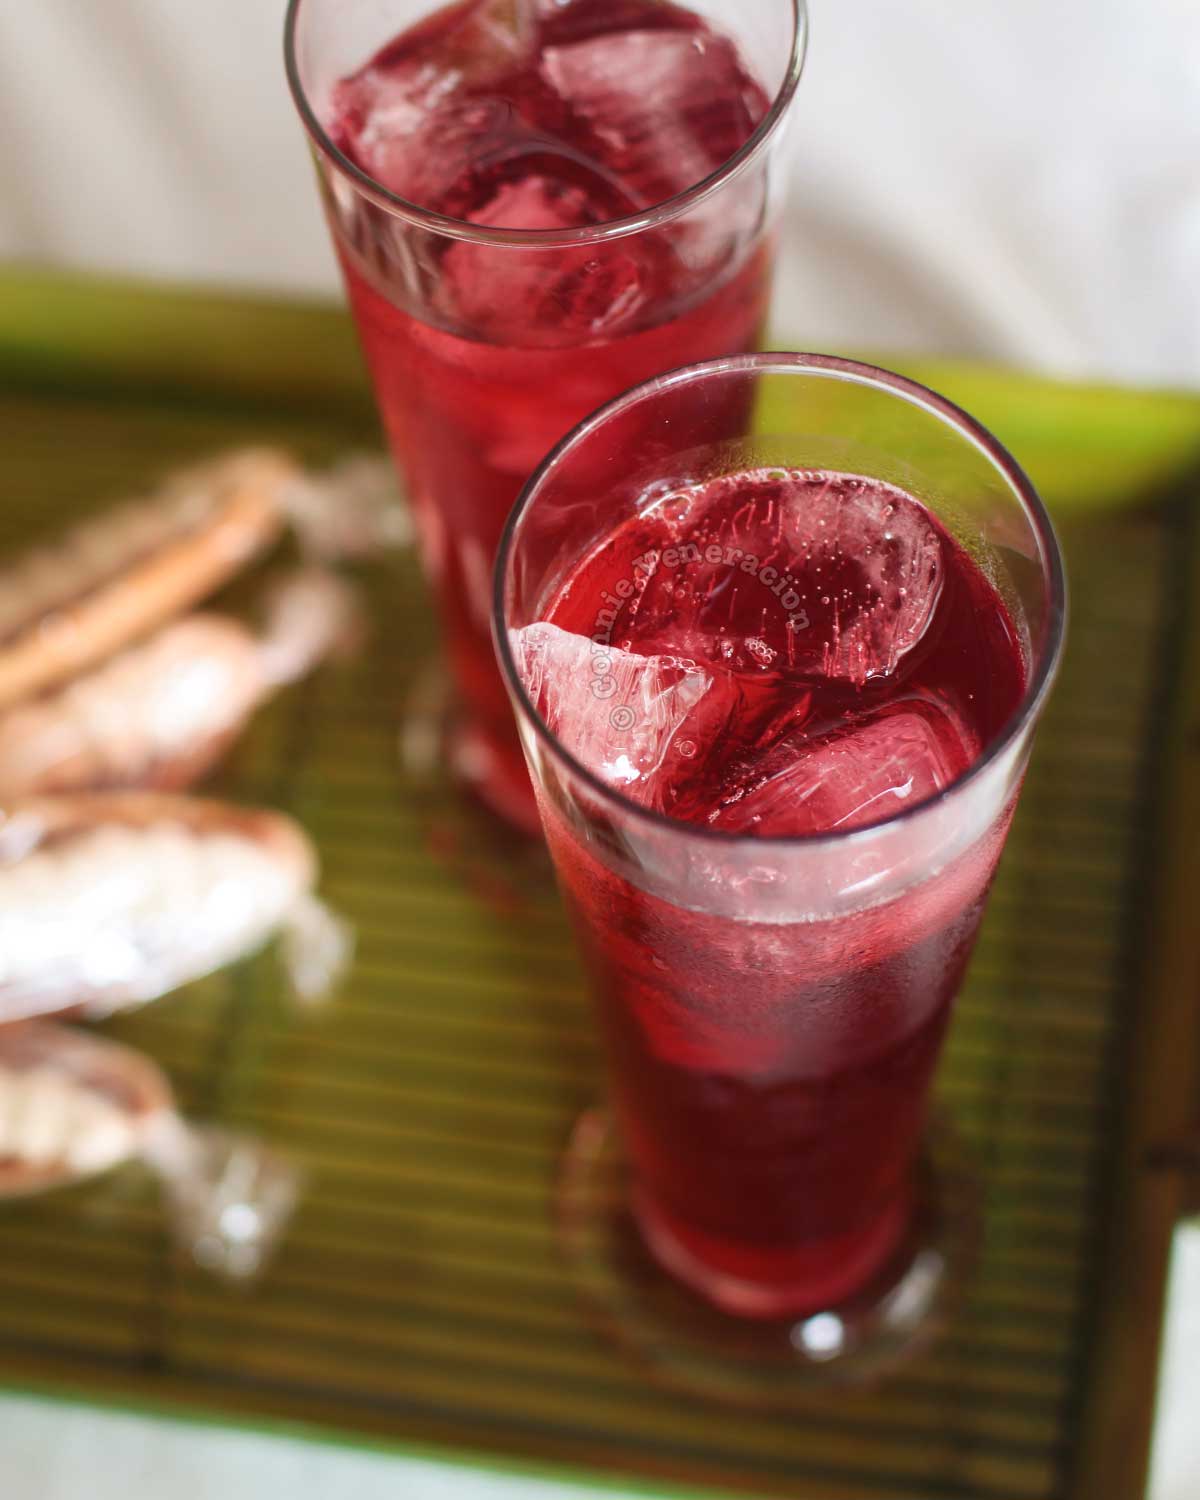 Ice-cold hibiscus (roselle) brew